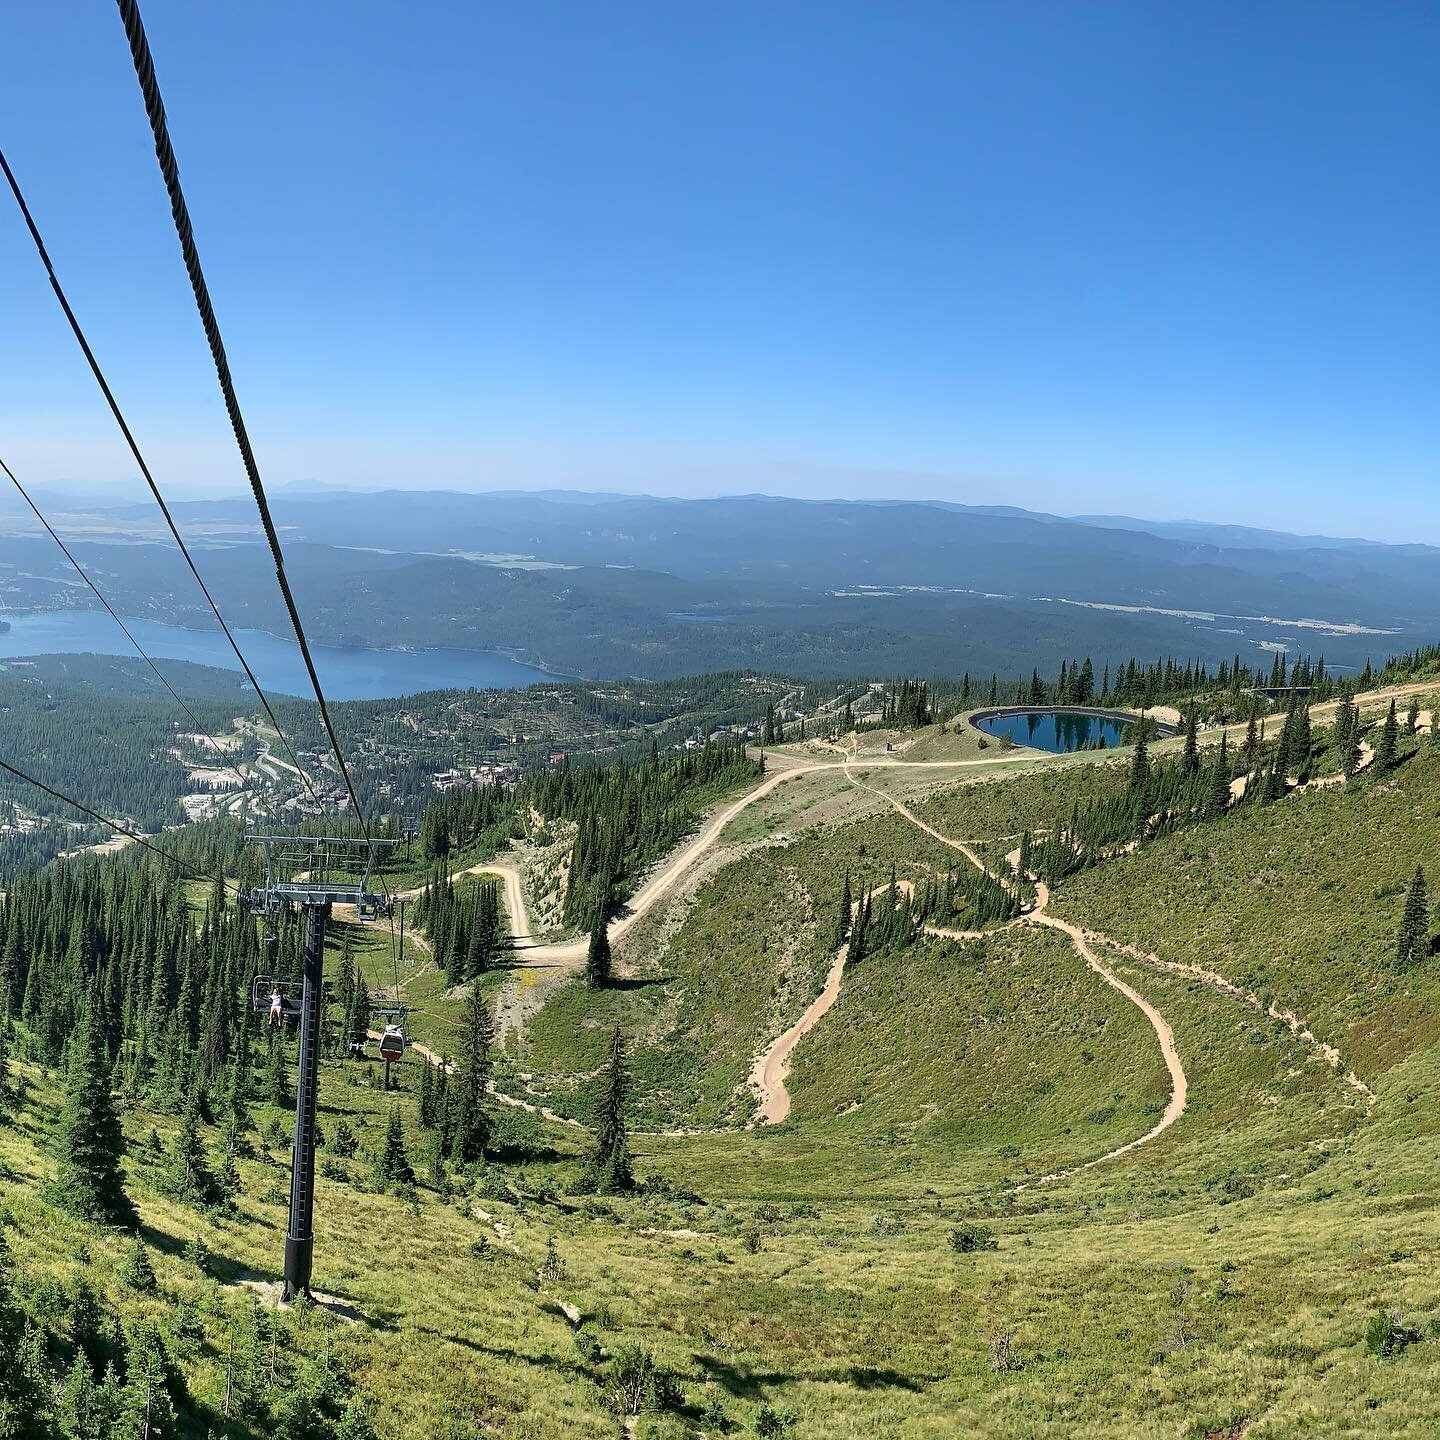 Beautiful view from the top of Big Mountain in Whitefish, Montana.